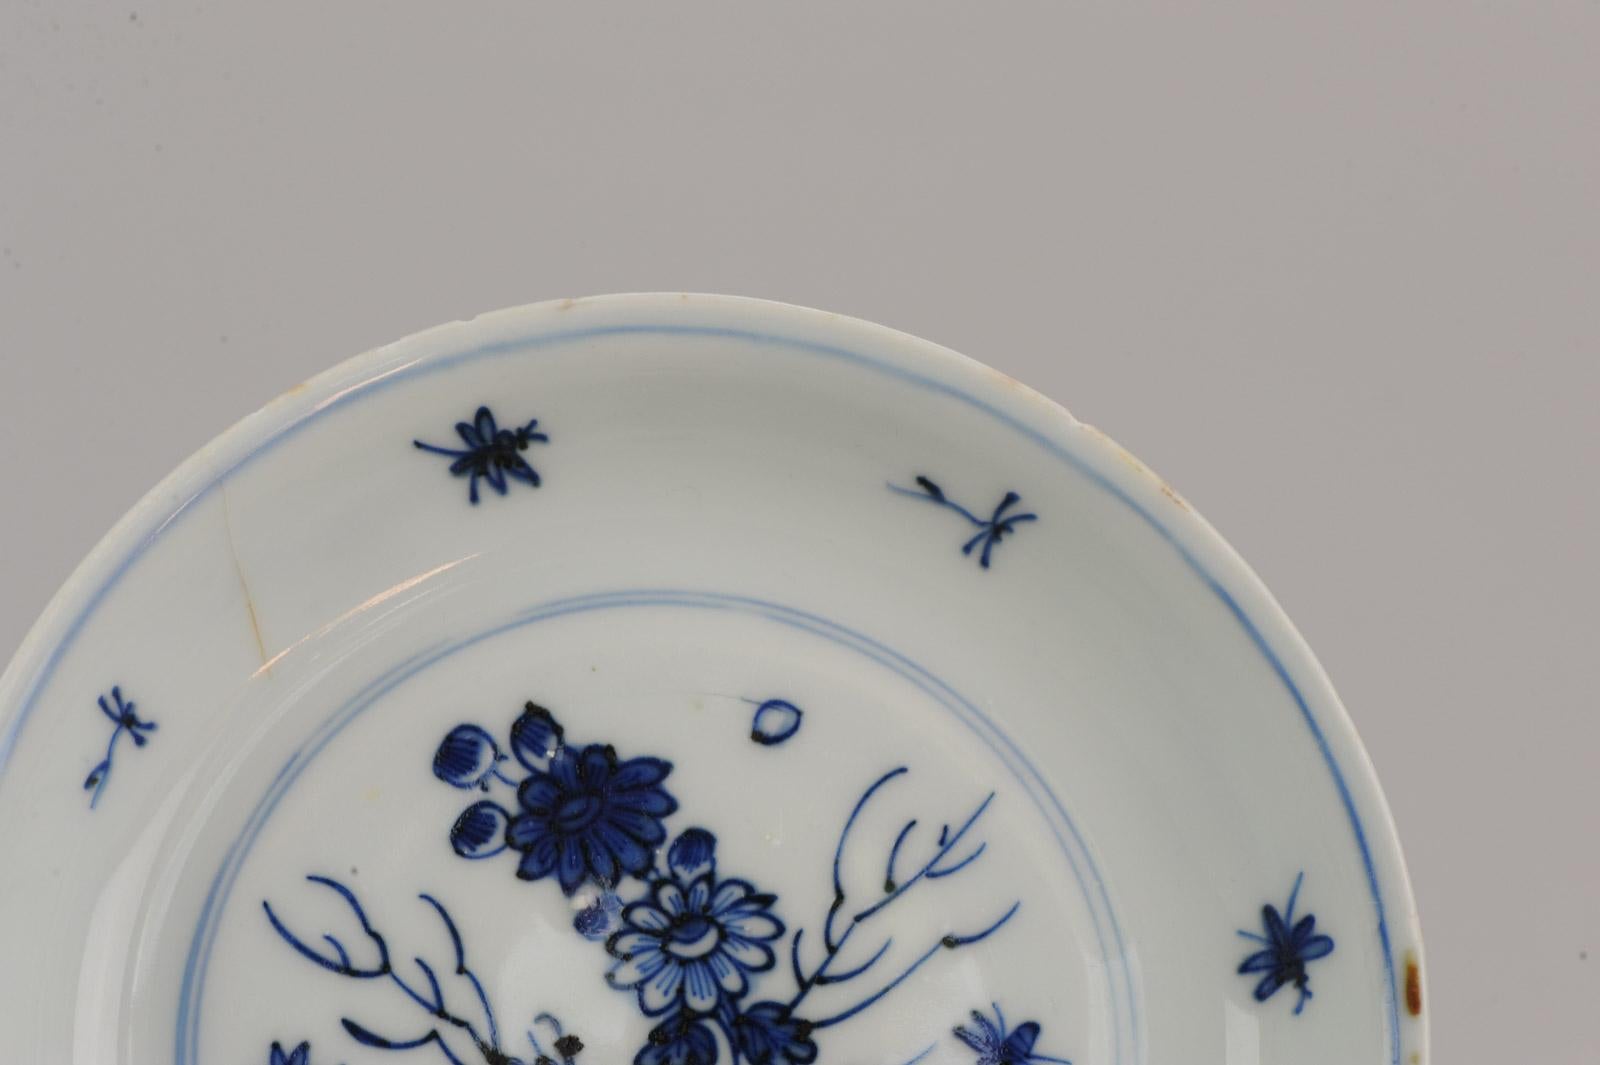 Antique Chinese Porcelain Plate 17th Century Ming Dynasty Tianqi/Chongzhen 5